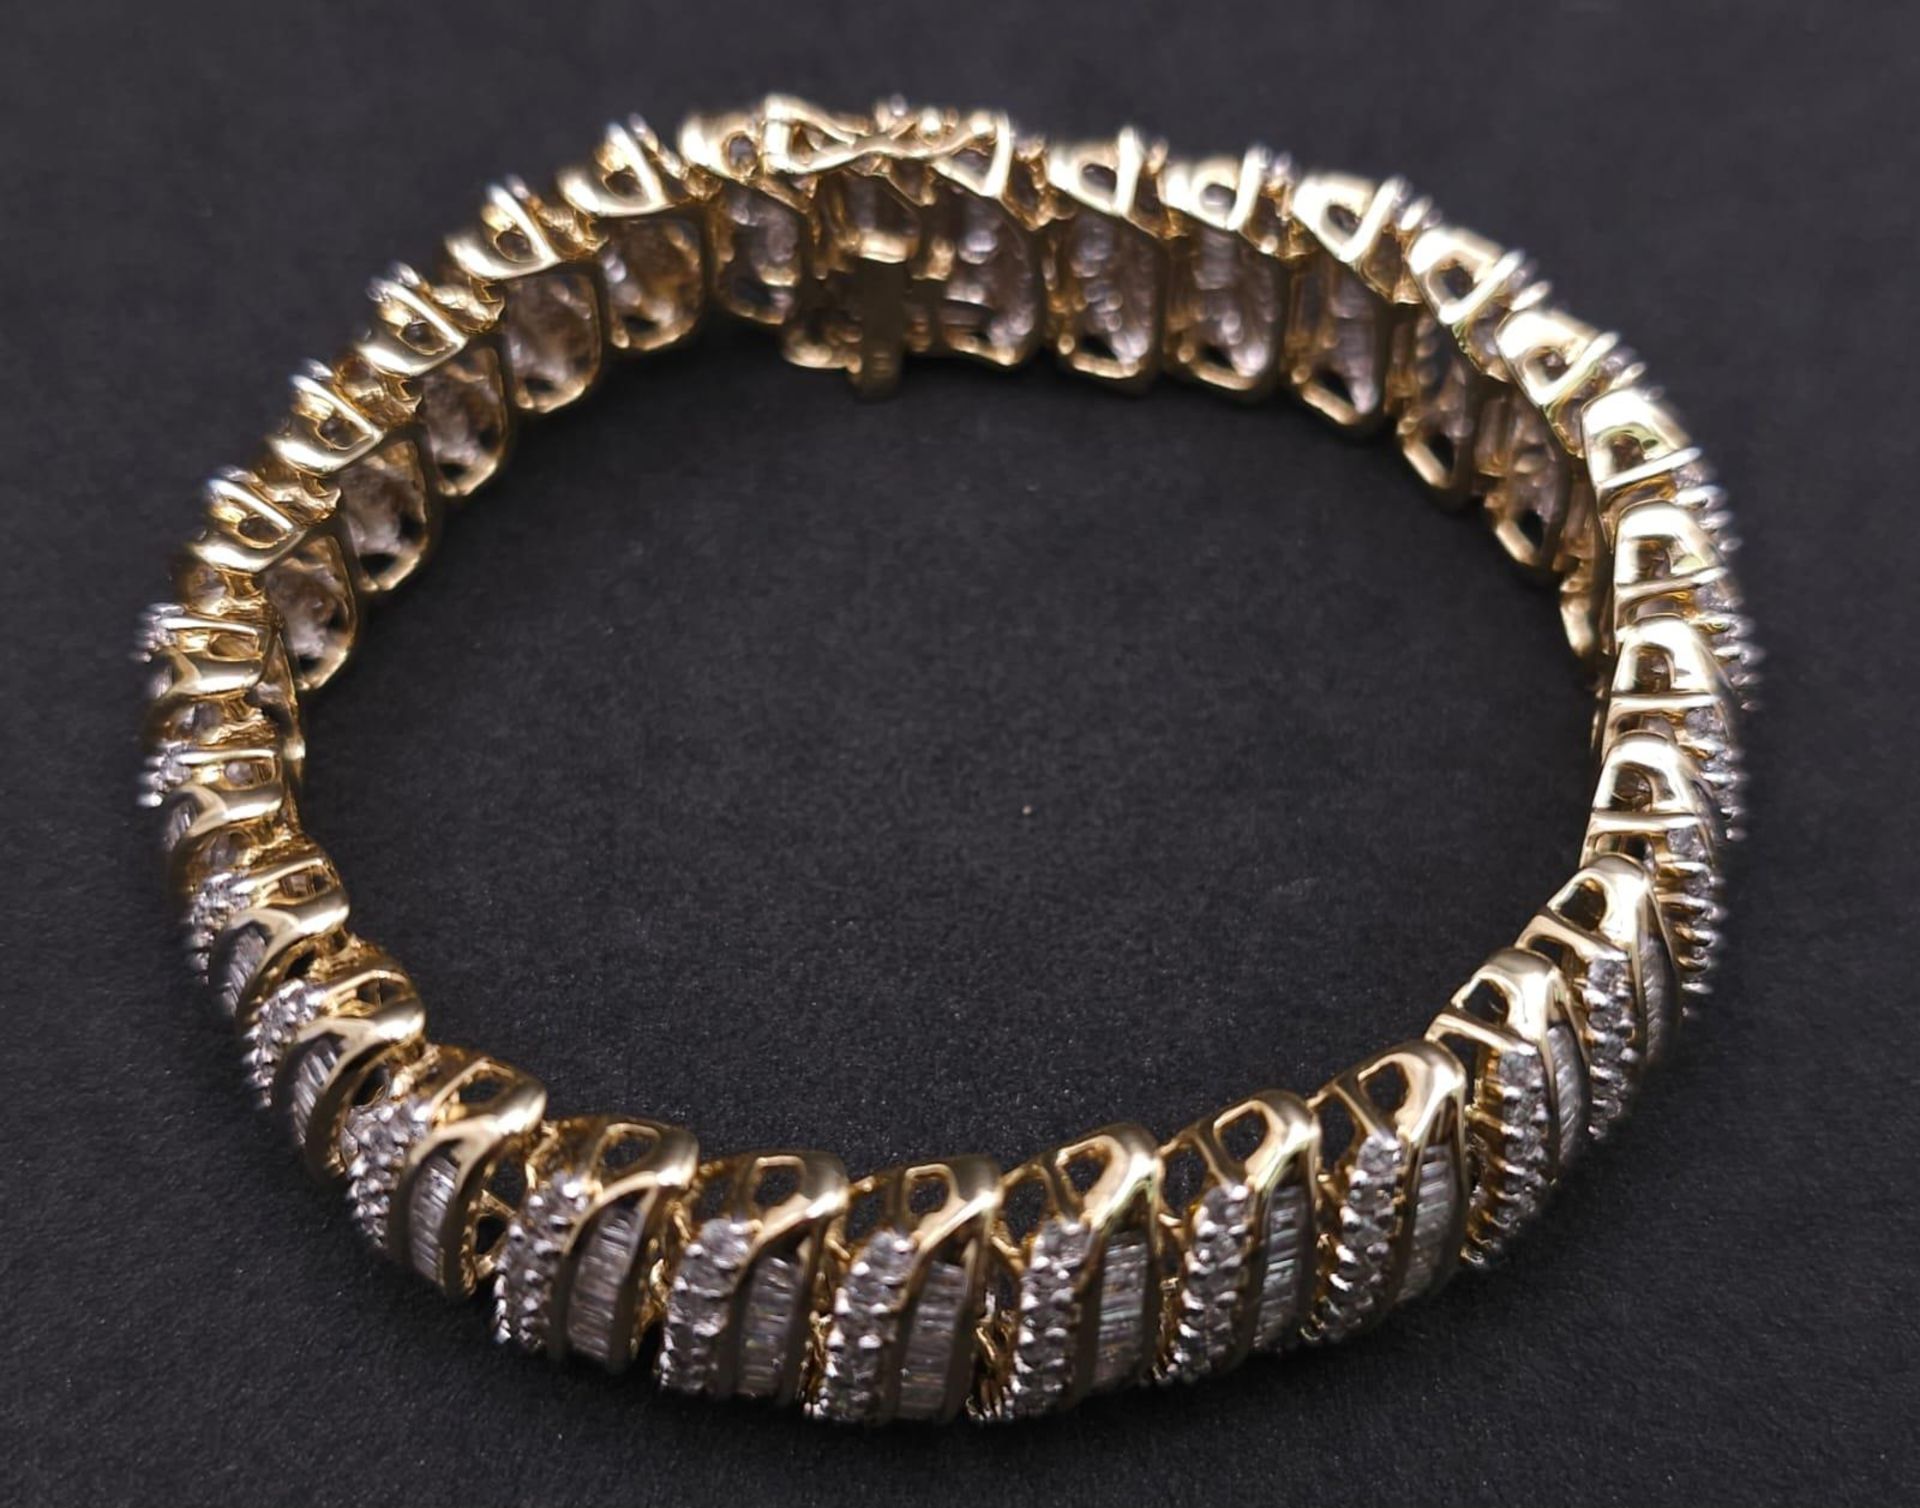 A BEAUTIFUL HEAD-TURNING 14K YELLOW GOLD DIAMOND TENNIS BRACELET WITH A MIXTURE OF ROUND AND - Image 4 of 10